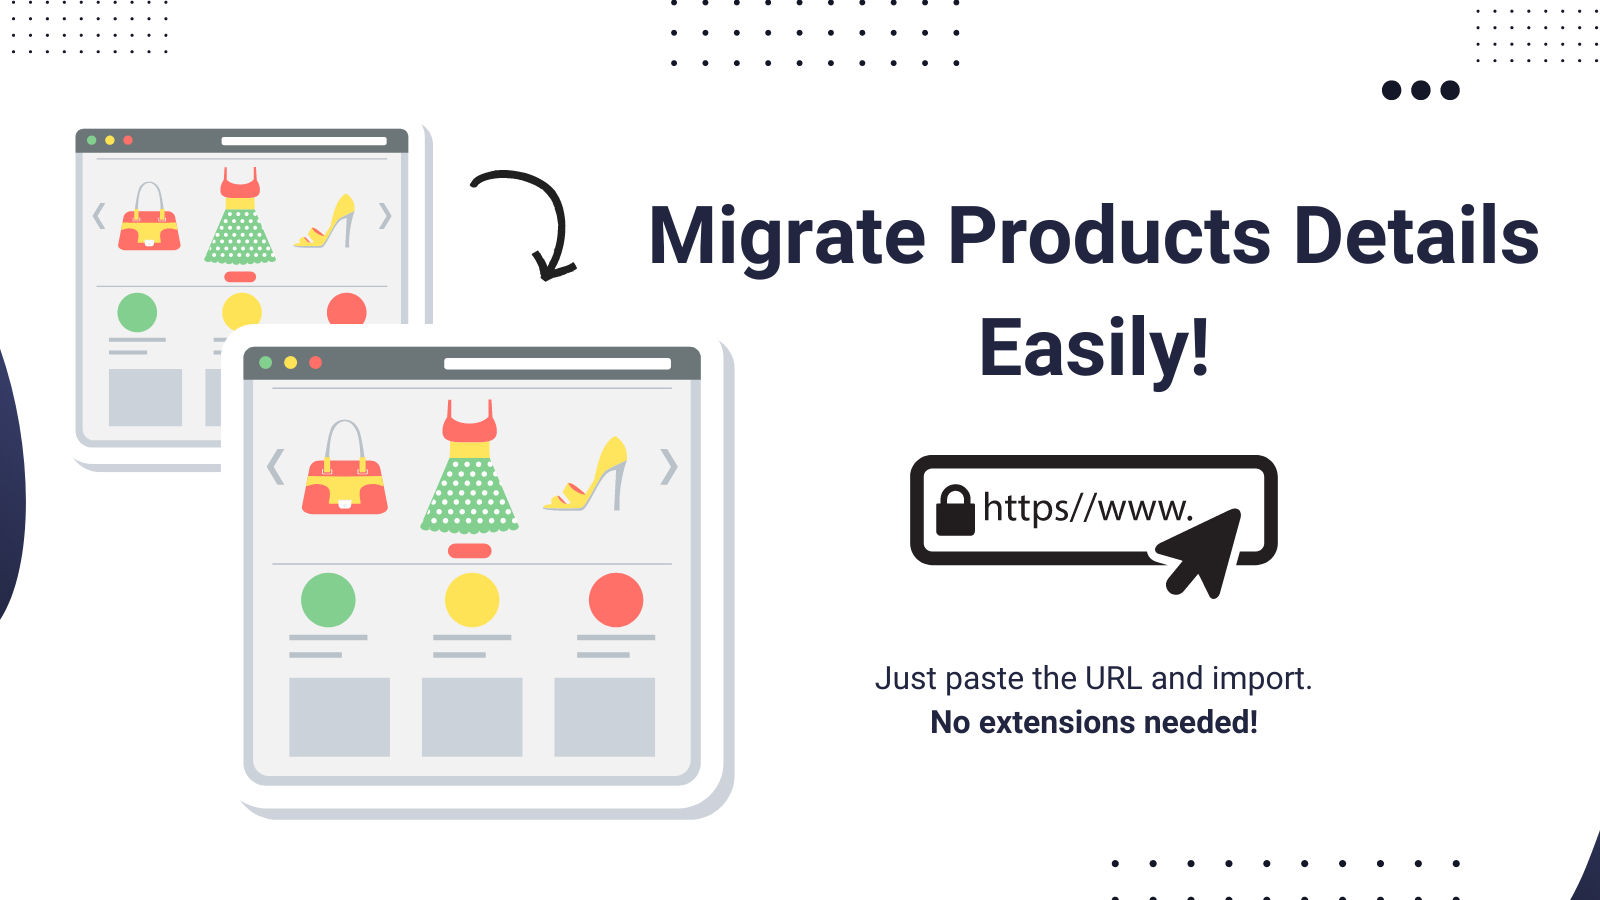 Migrate products easily